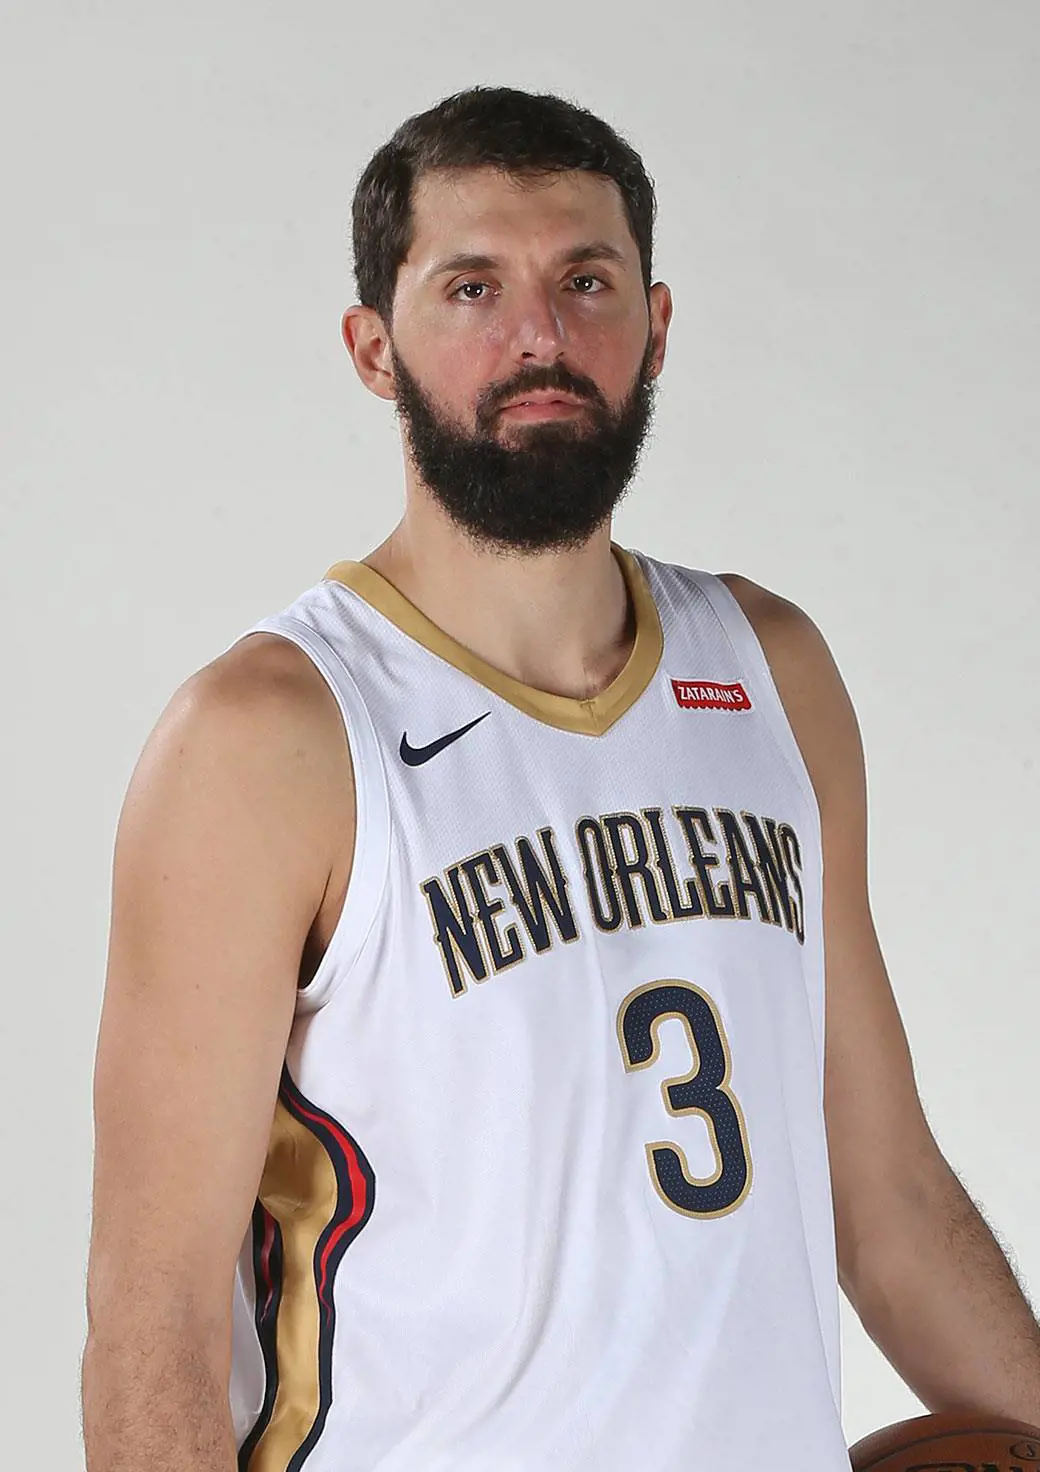 Nikola Mirotic played one season with the Orleans